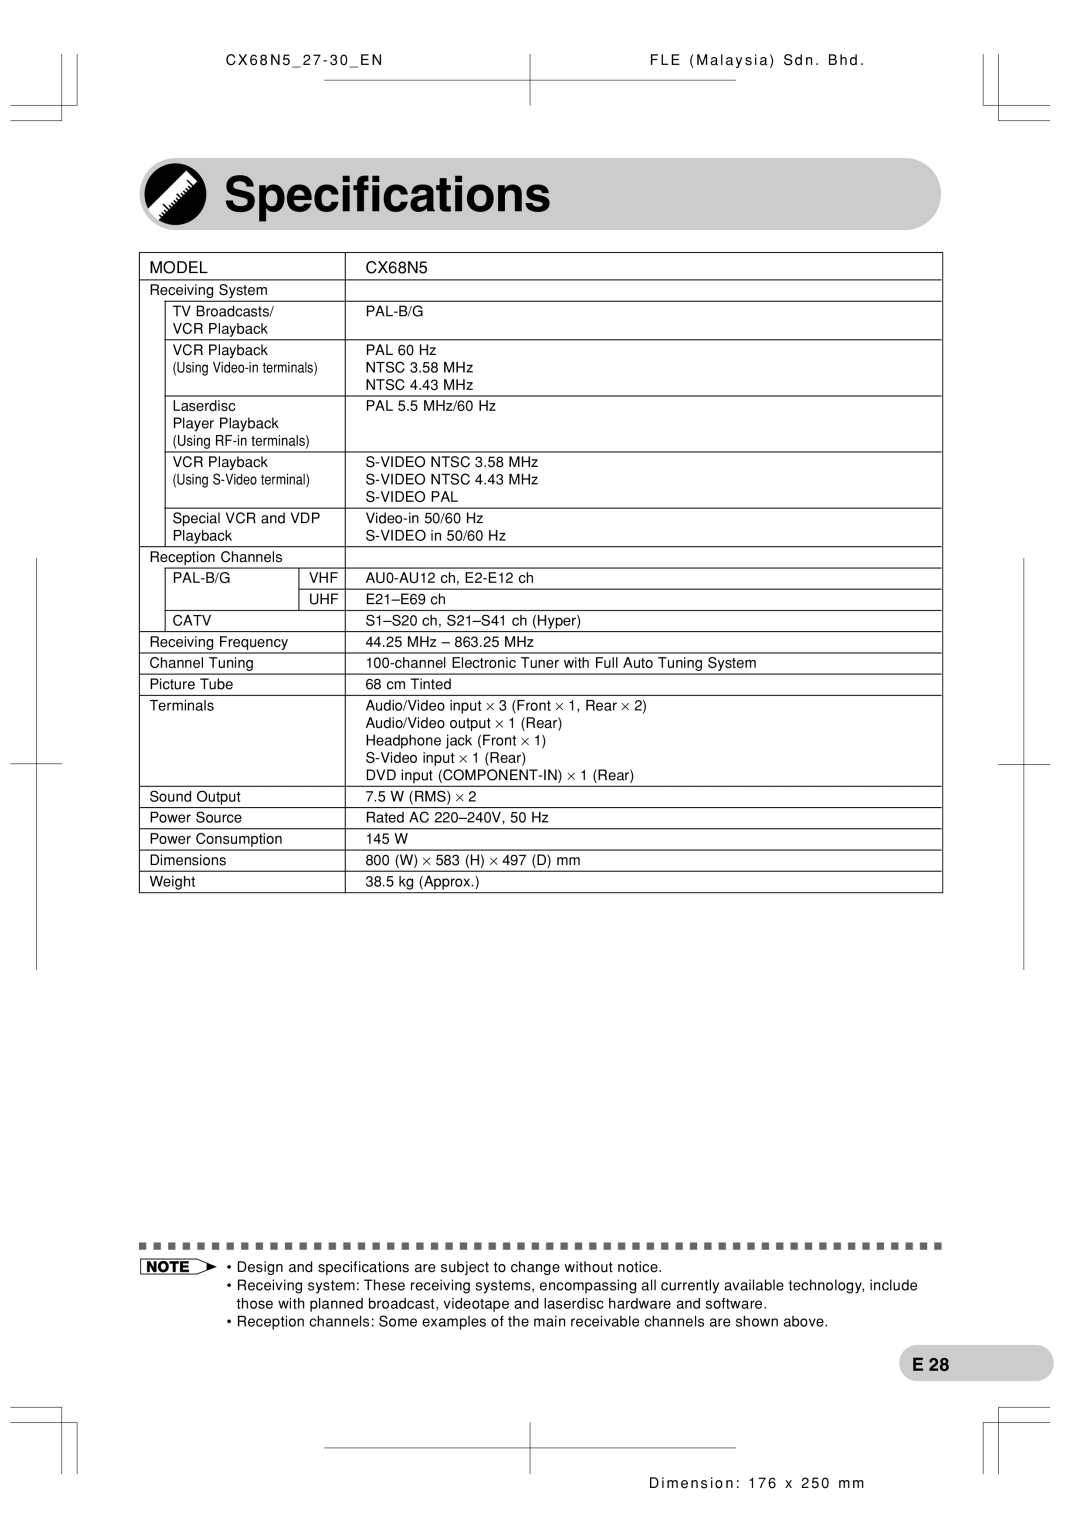 Sharp Cx68n5 operation manual Specifications, Model, CX68N5 